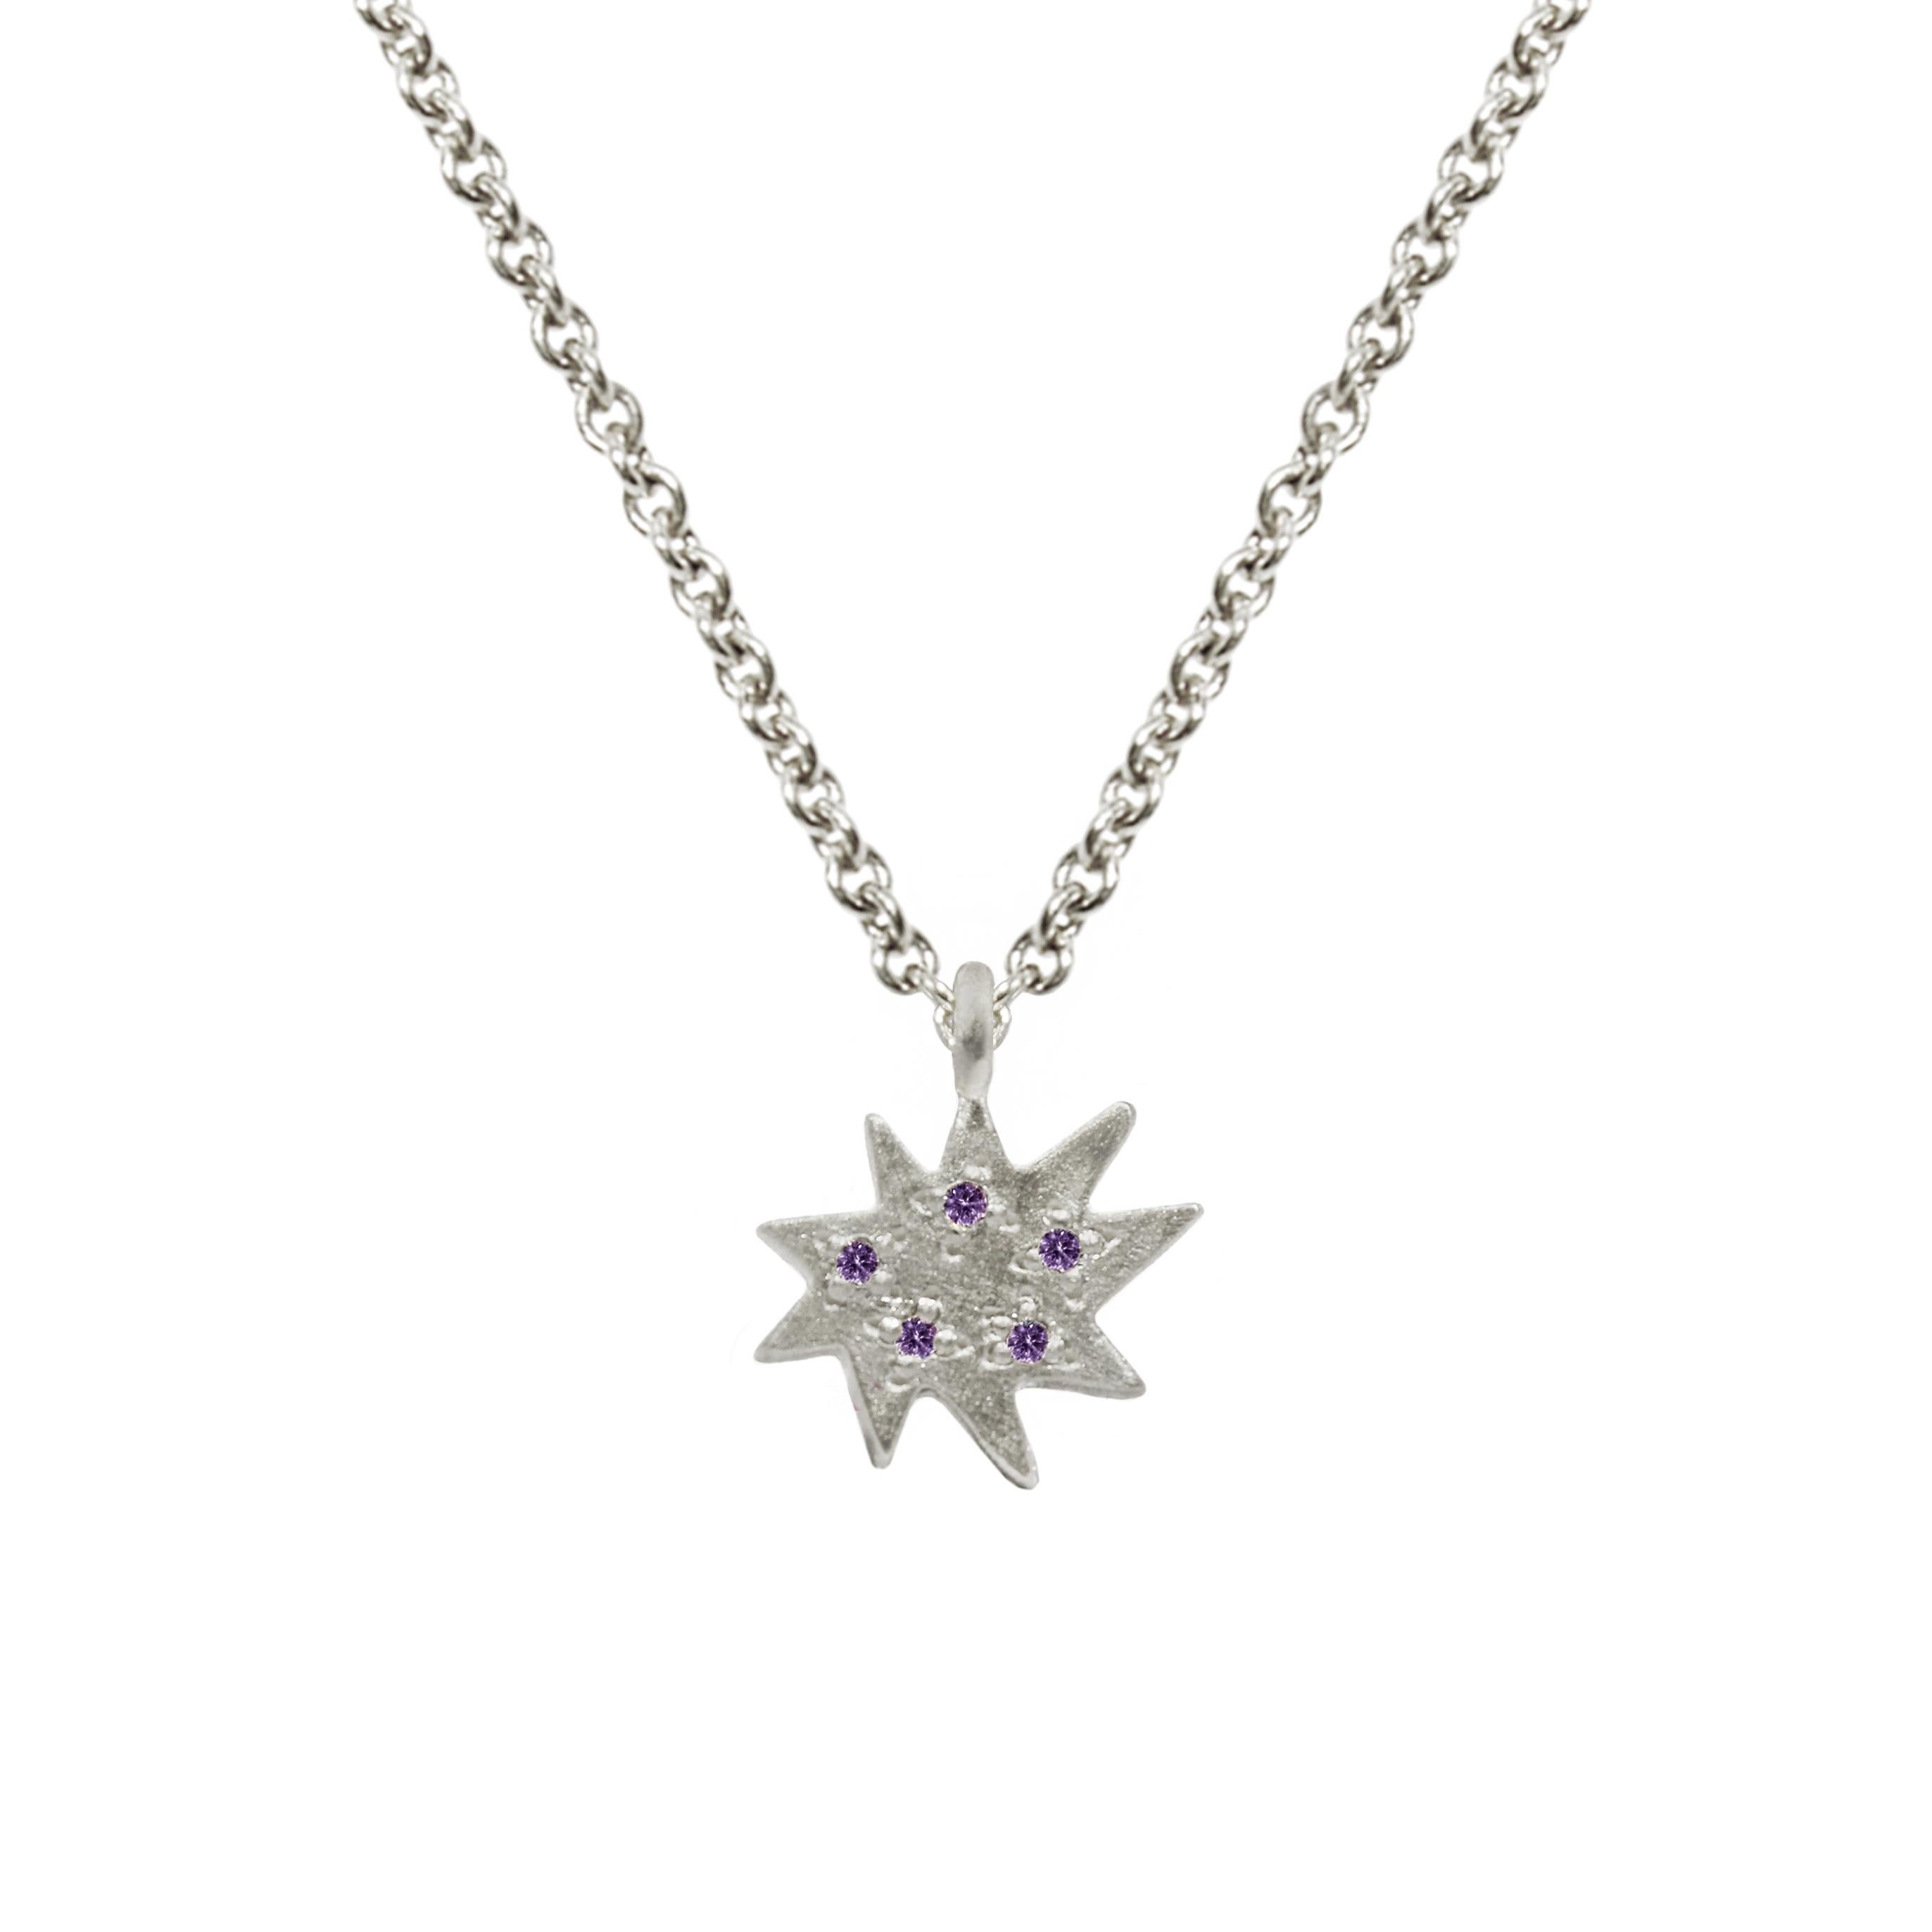 Emily Kuvin Mini Stella Silver and Amethyst Star Dainty Layering Necklace